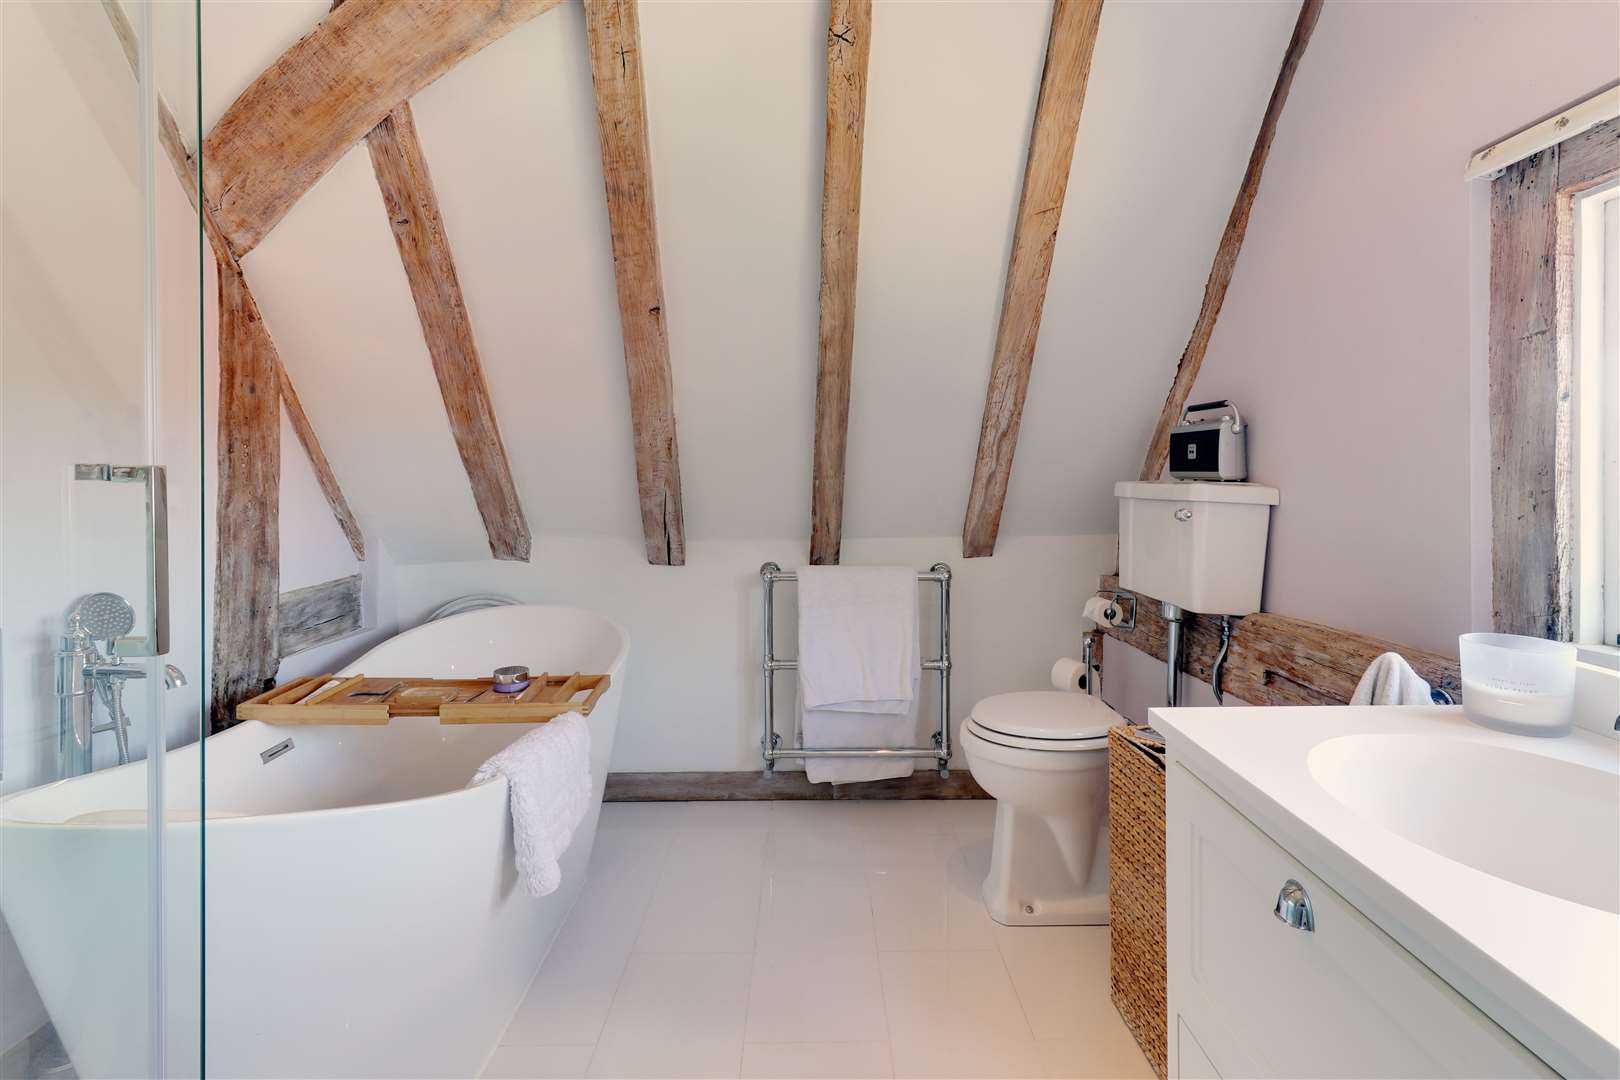 Relax with a bubble bath at the end of a long day. Picture: Savills